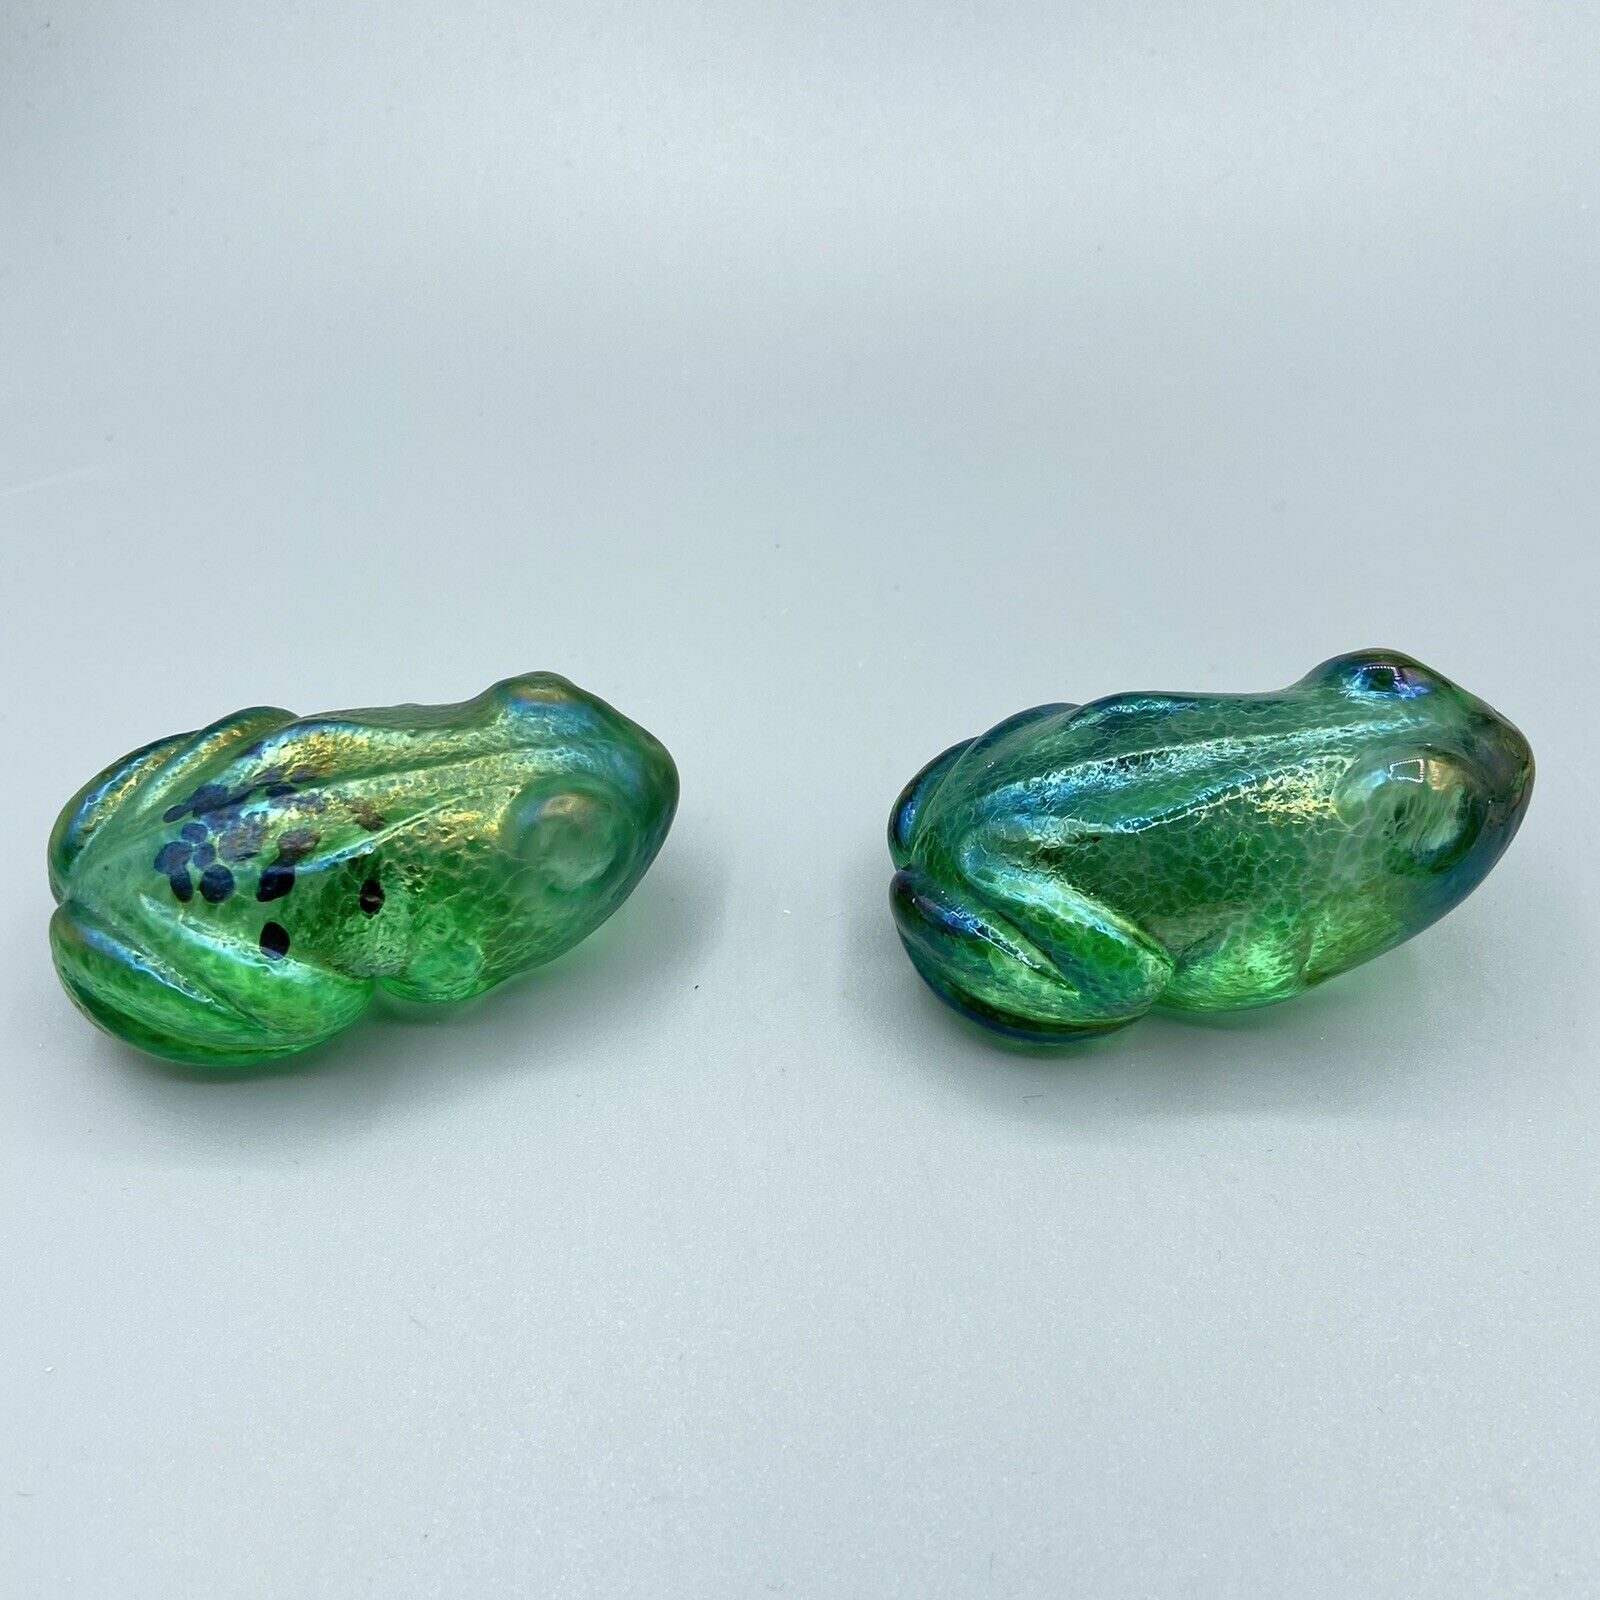 Two 2 Iridescent Green Frog Toad Robert Held Art Glass Rhag Signed Paper Weight